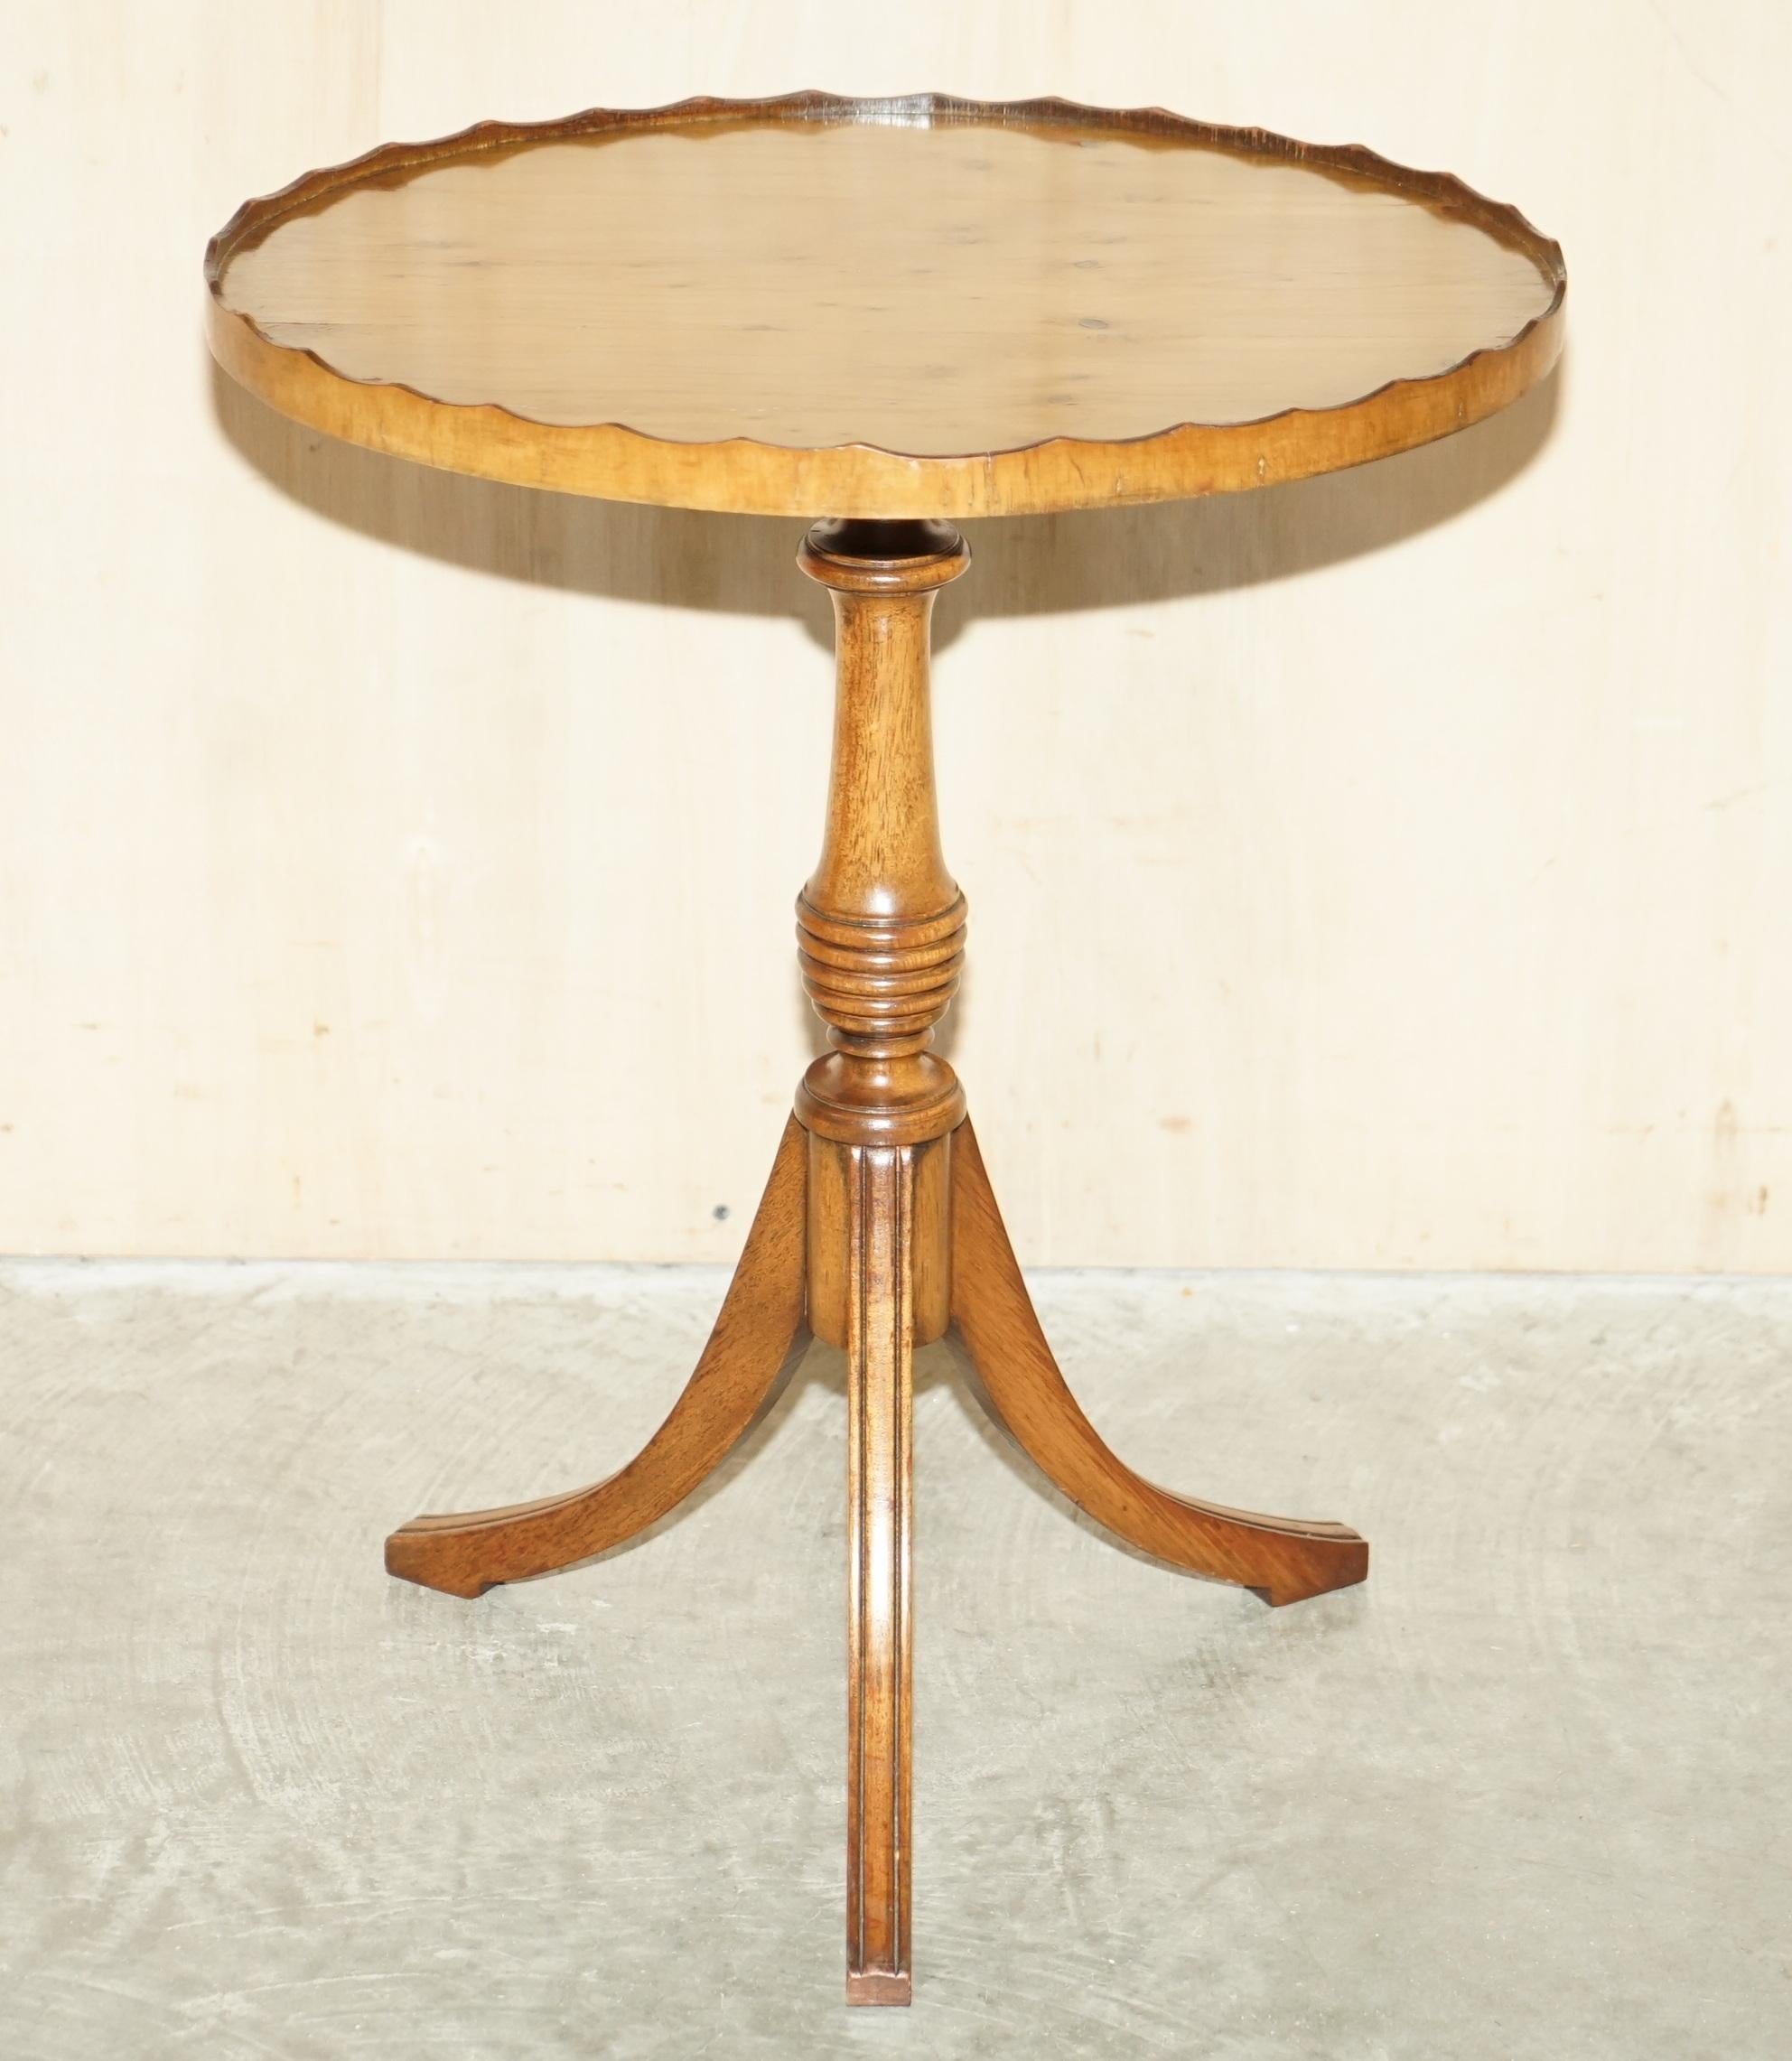 We are delighted to offer for sale this lovely hand made in England vintage Burr Yew wood tripod side table

A very good looking well made and decorative side table with nice gallery rail 

This piece is in sublime condition, the timber patina